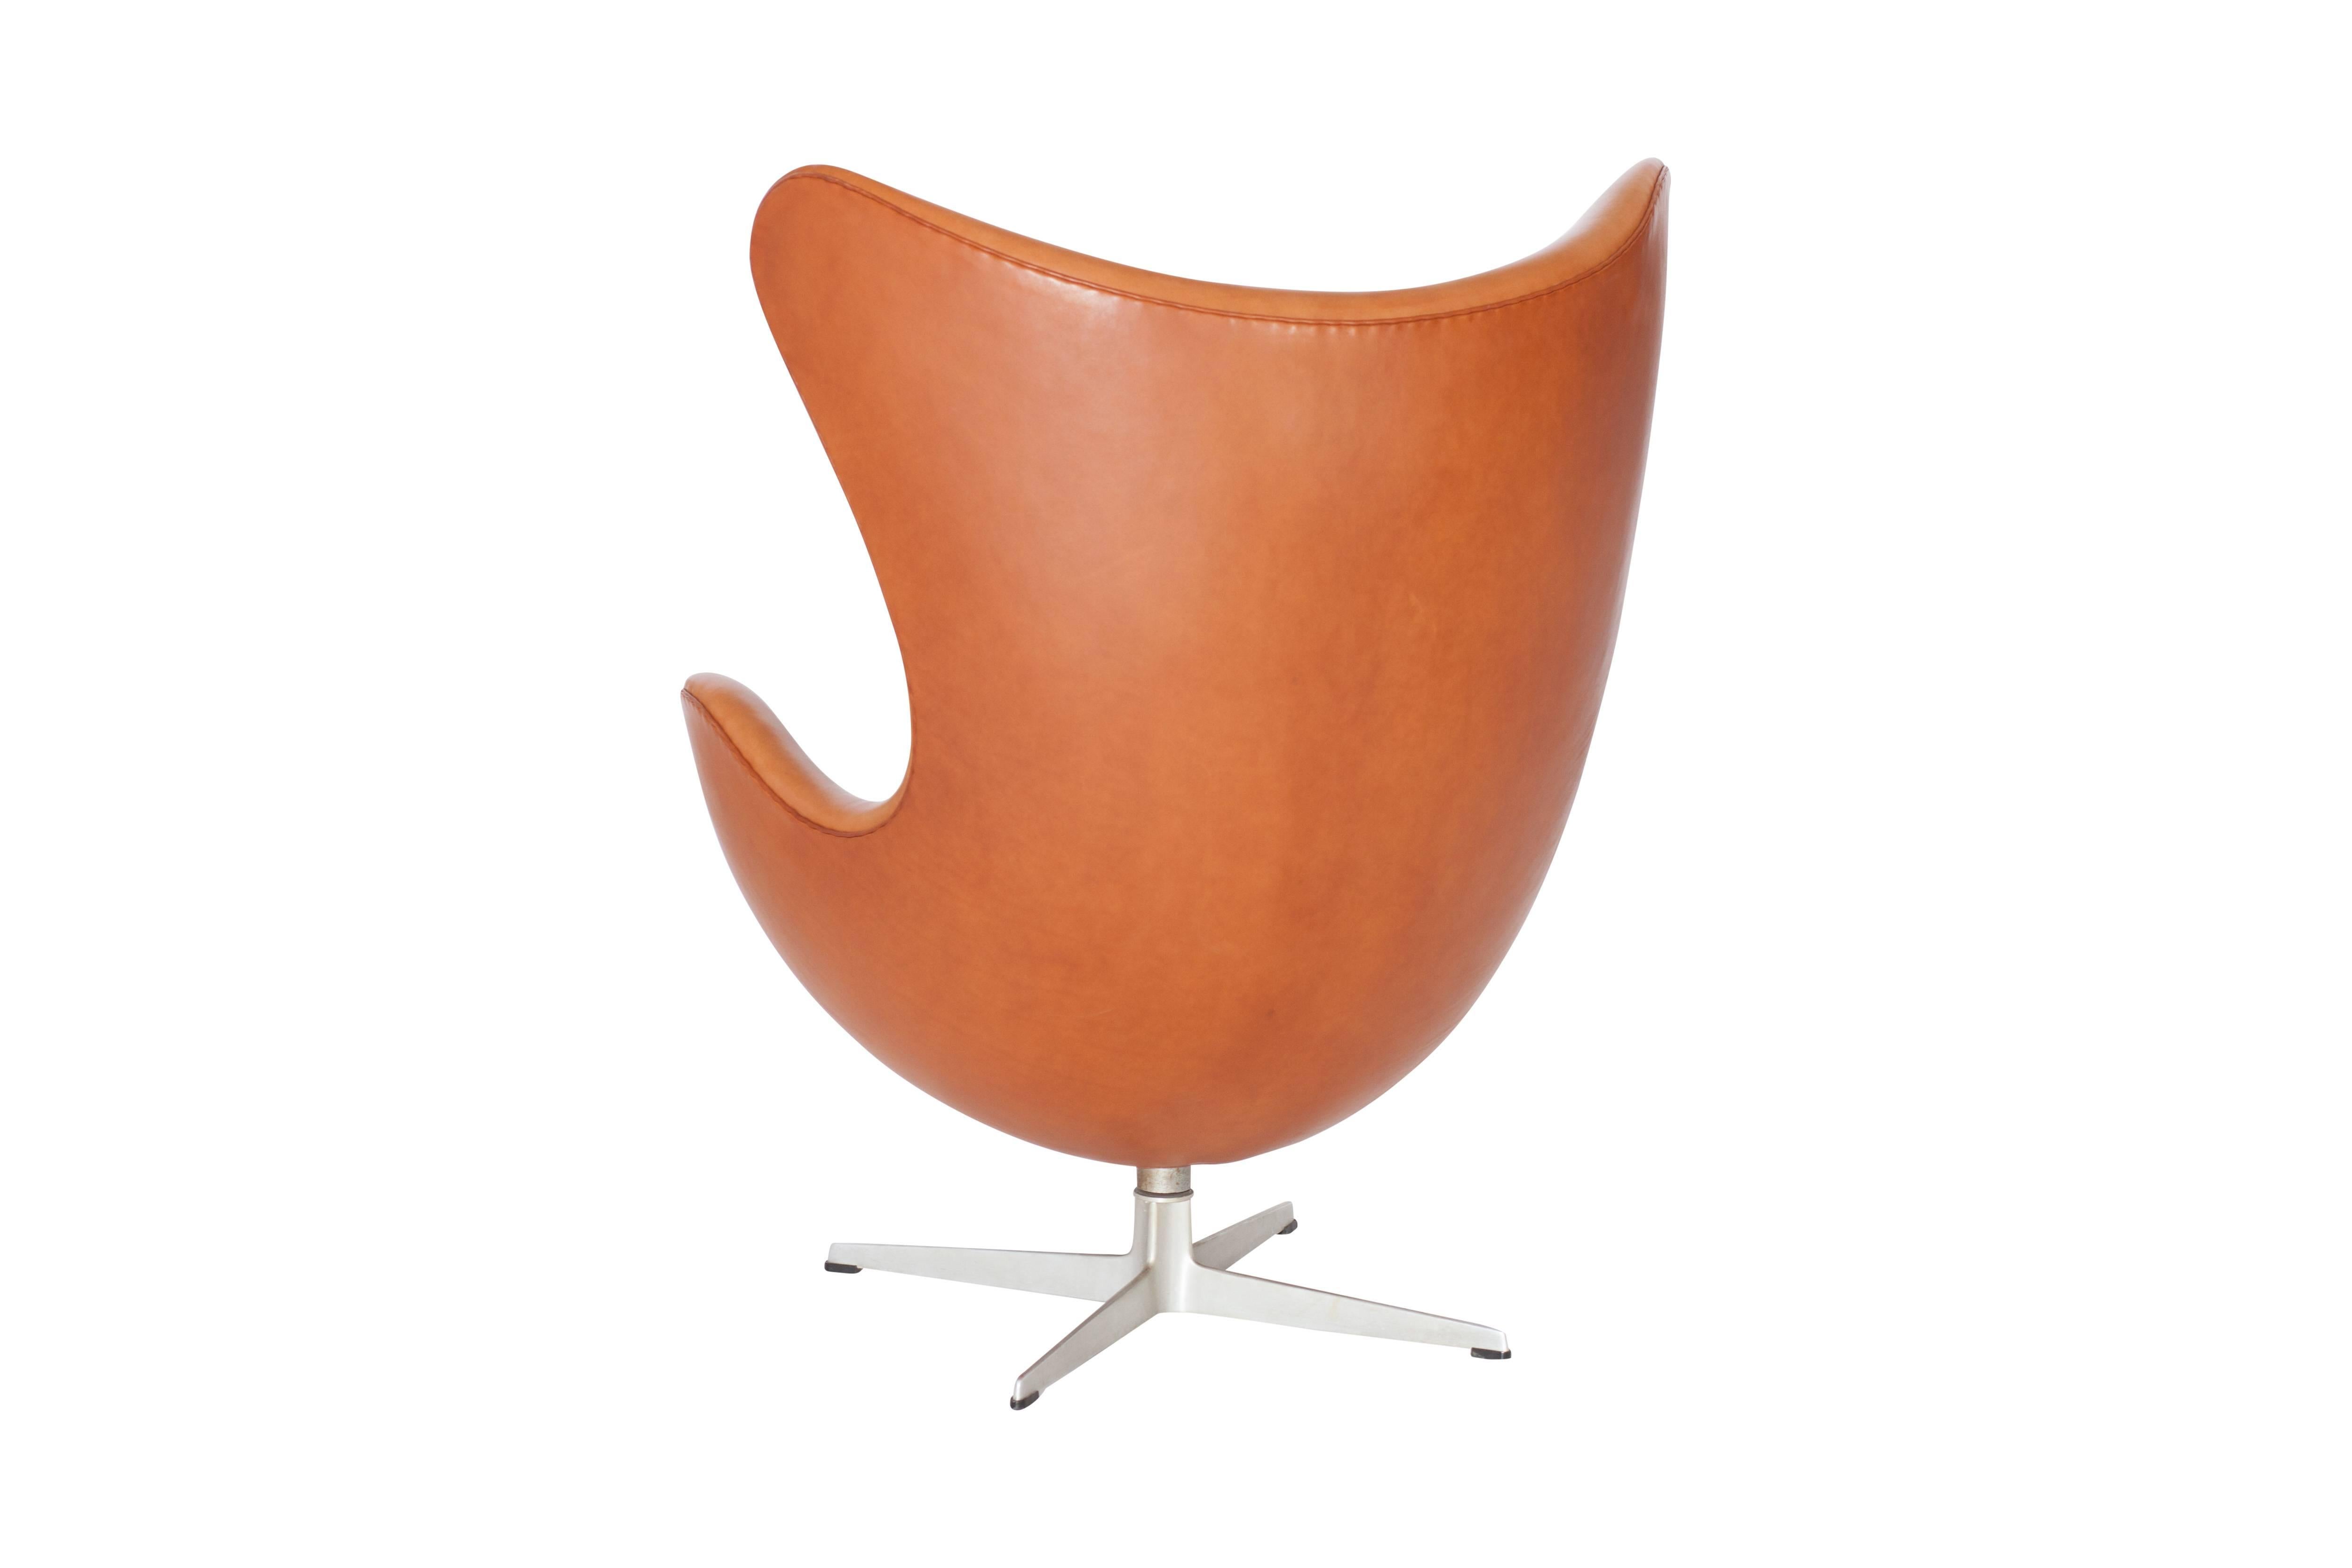 Mid-20th Century Egg Chair in Cognac Leather by Arne Jacobsen